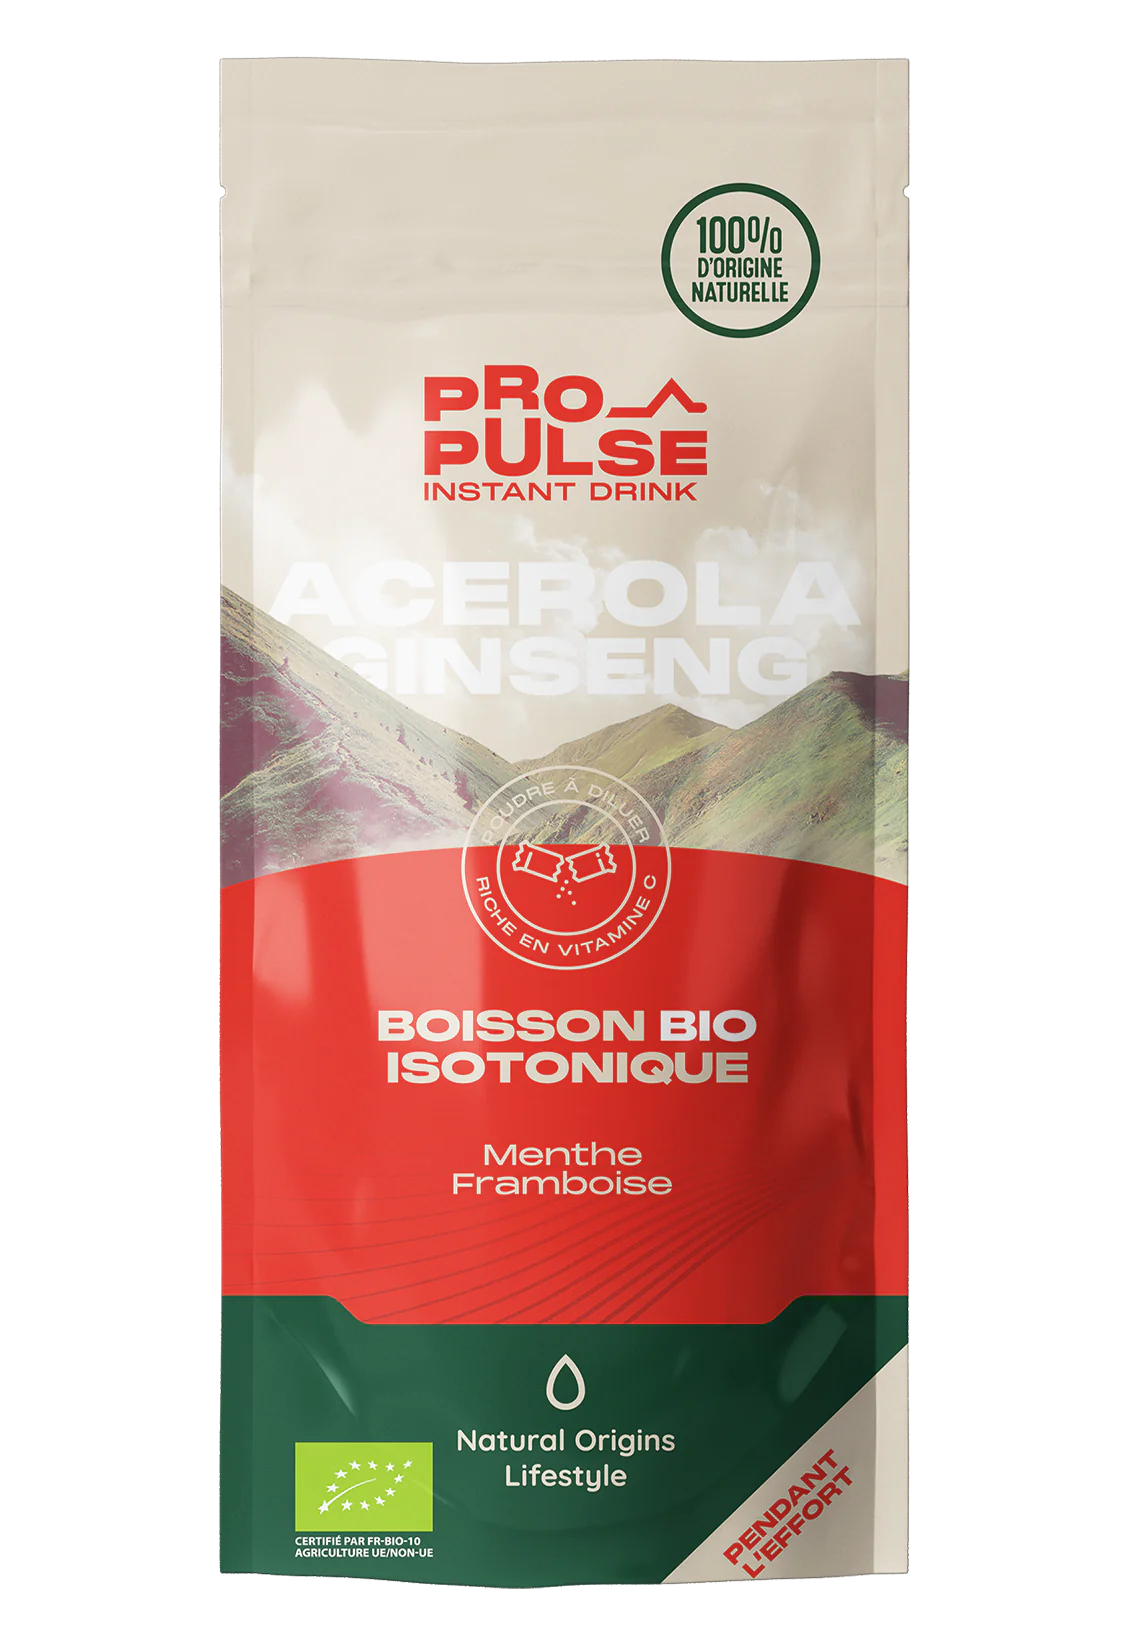 ProPulse: THE 100% Natural Organic Isotonic Energy Drink - Natural Origins